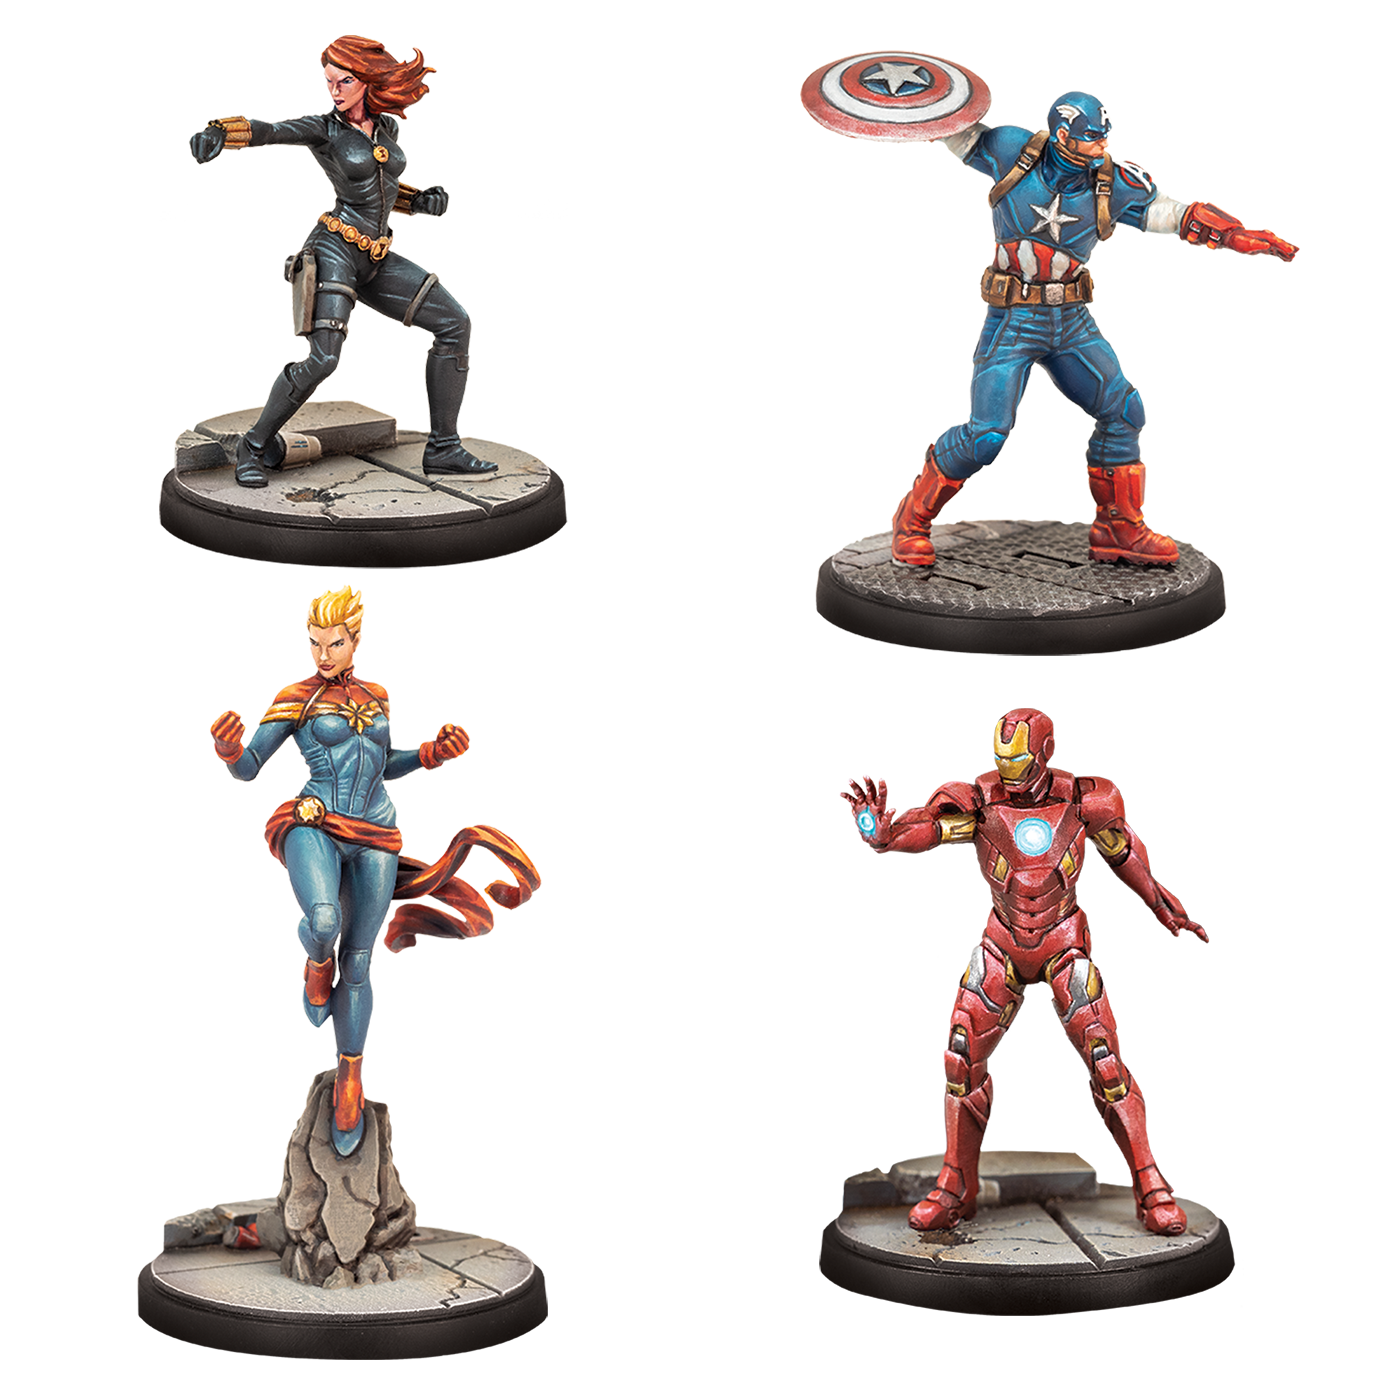 Marvel Crisis Protocol: Avengers Affiliation Pack -  Release Date 17/5/24 - Loaded Dice